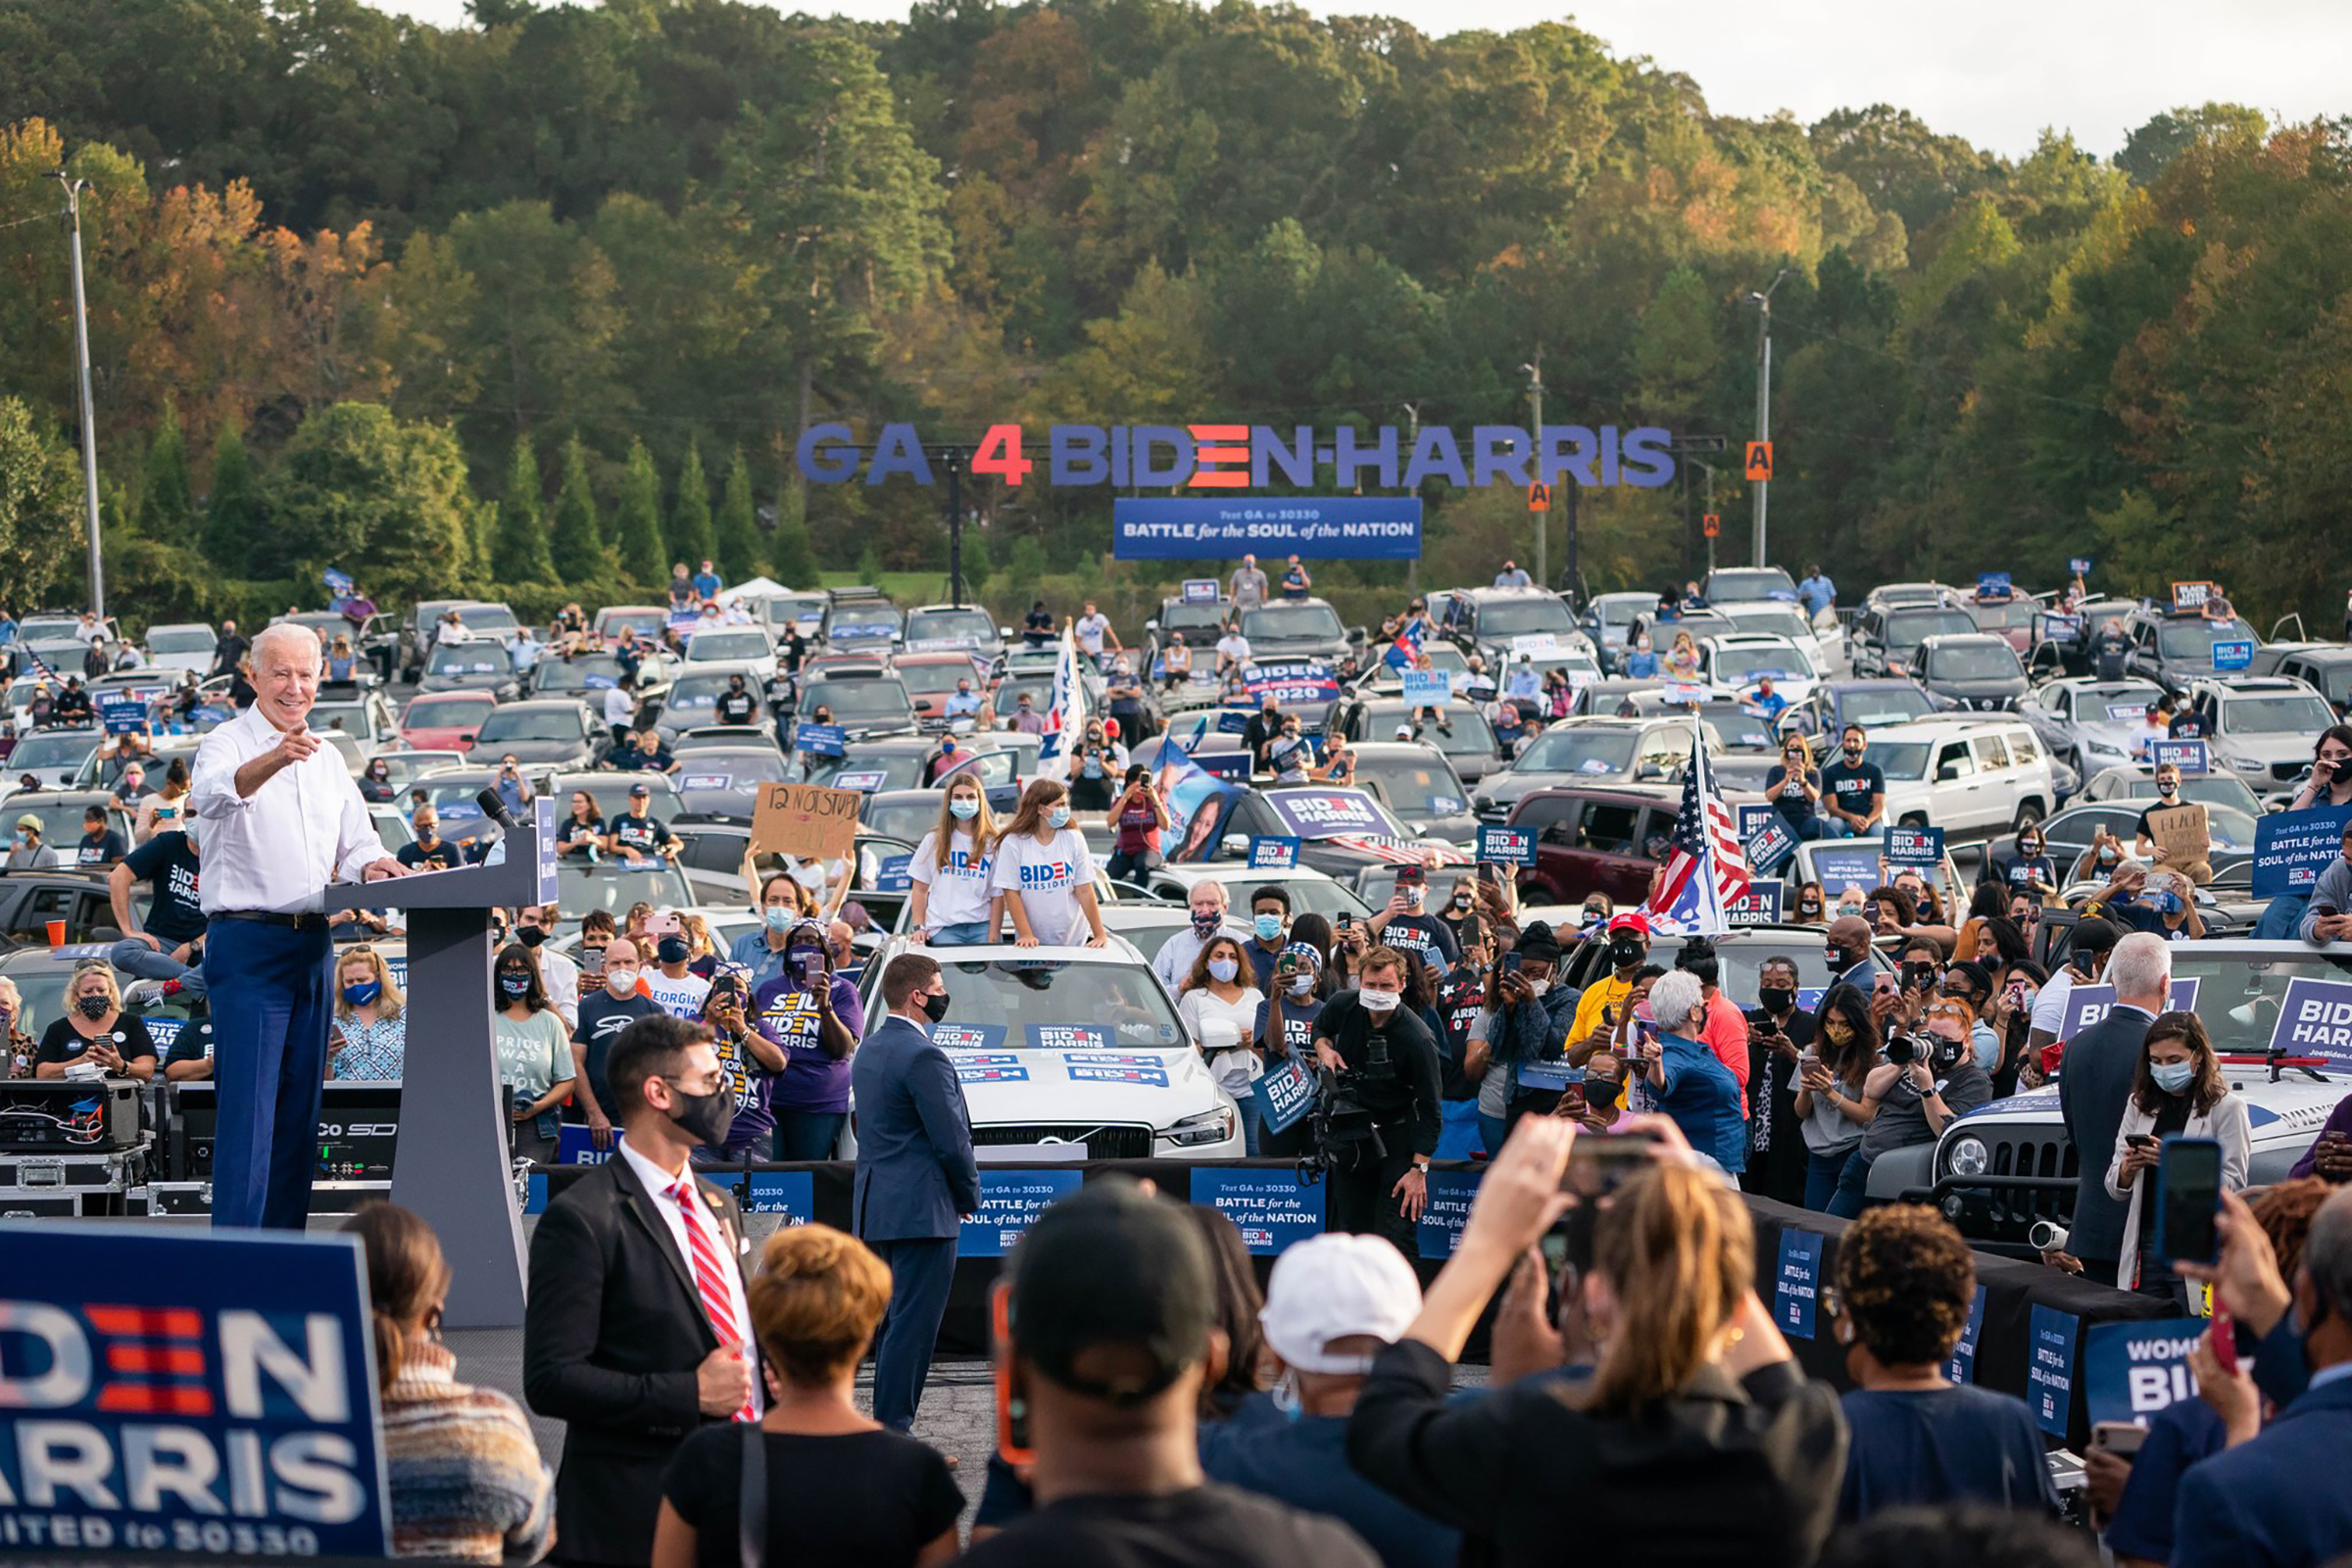 Biden interacts with voters at a car rally in Georgia (Courtesy Manny Yekutiel)